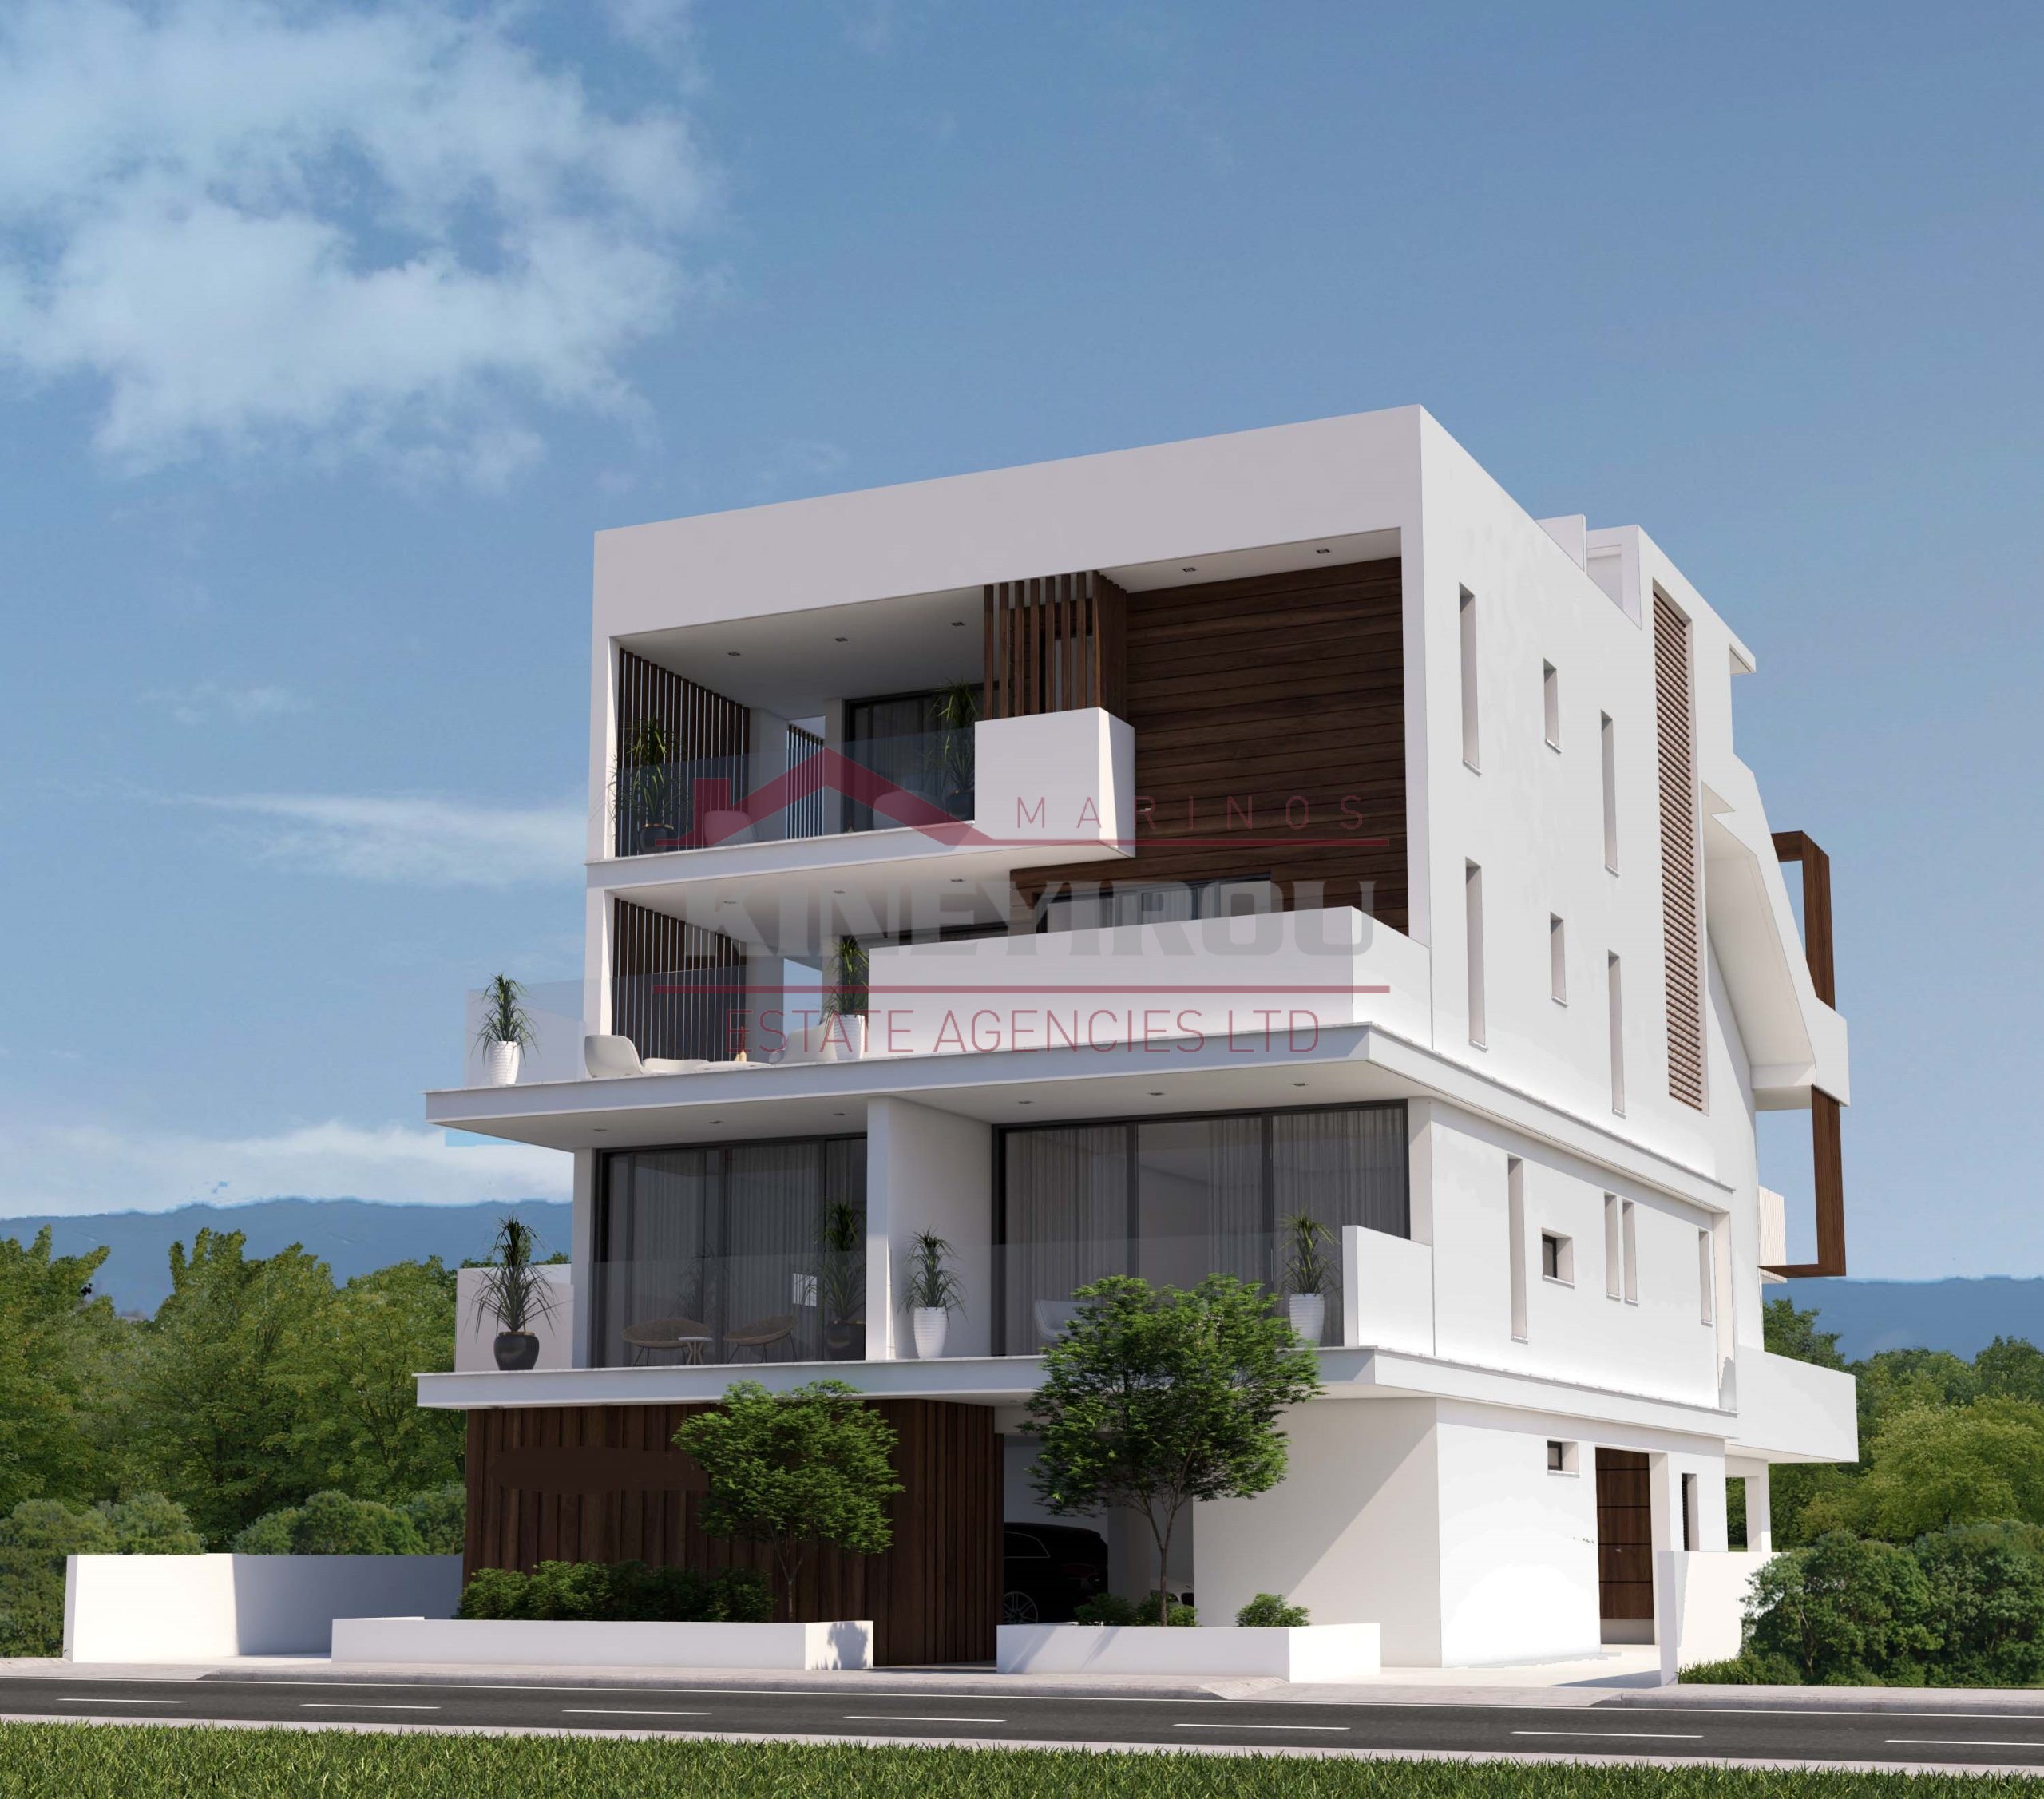 Brand new 2 Bedroom Apartment with Roof Garden in Aradippou area, Larnaca.